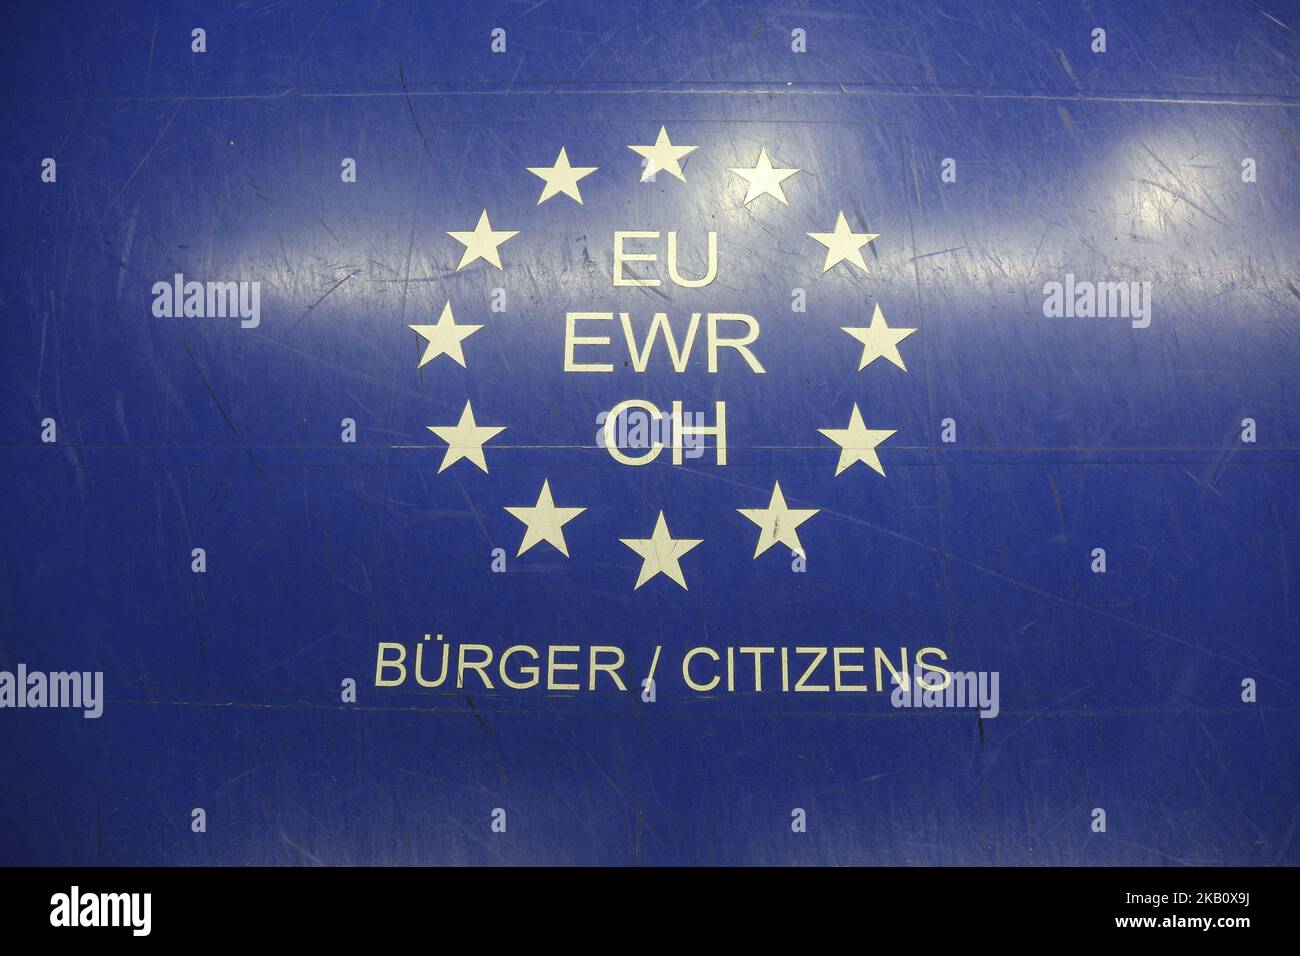 EU citizen signs at the arrivals in Dusseldorf International Airport in Germany. There are special lanes to passport control, immigration for EU citizens - eu / ewr / ch. The signs are separating lines between All Passports, EU, Schengen passports or Other Nationalities. (Photo by Nicolas Economou/NurPhoto) Stock Photo